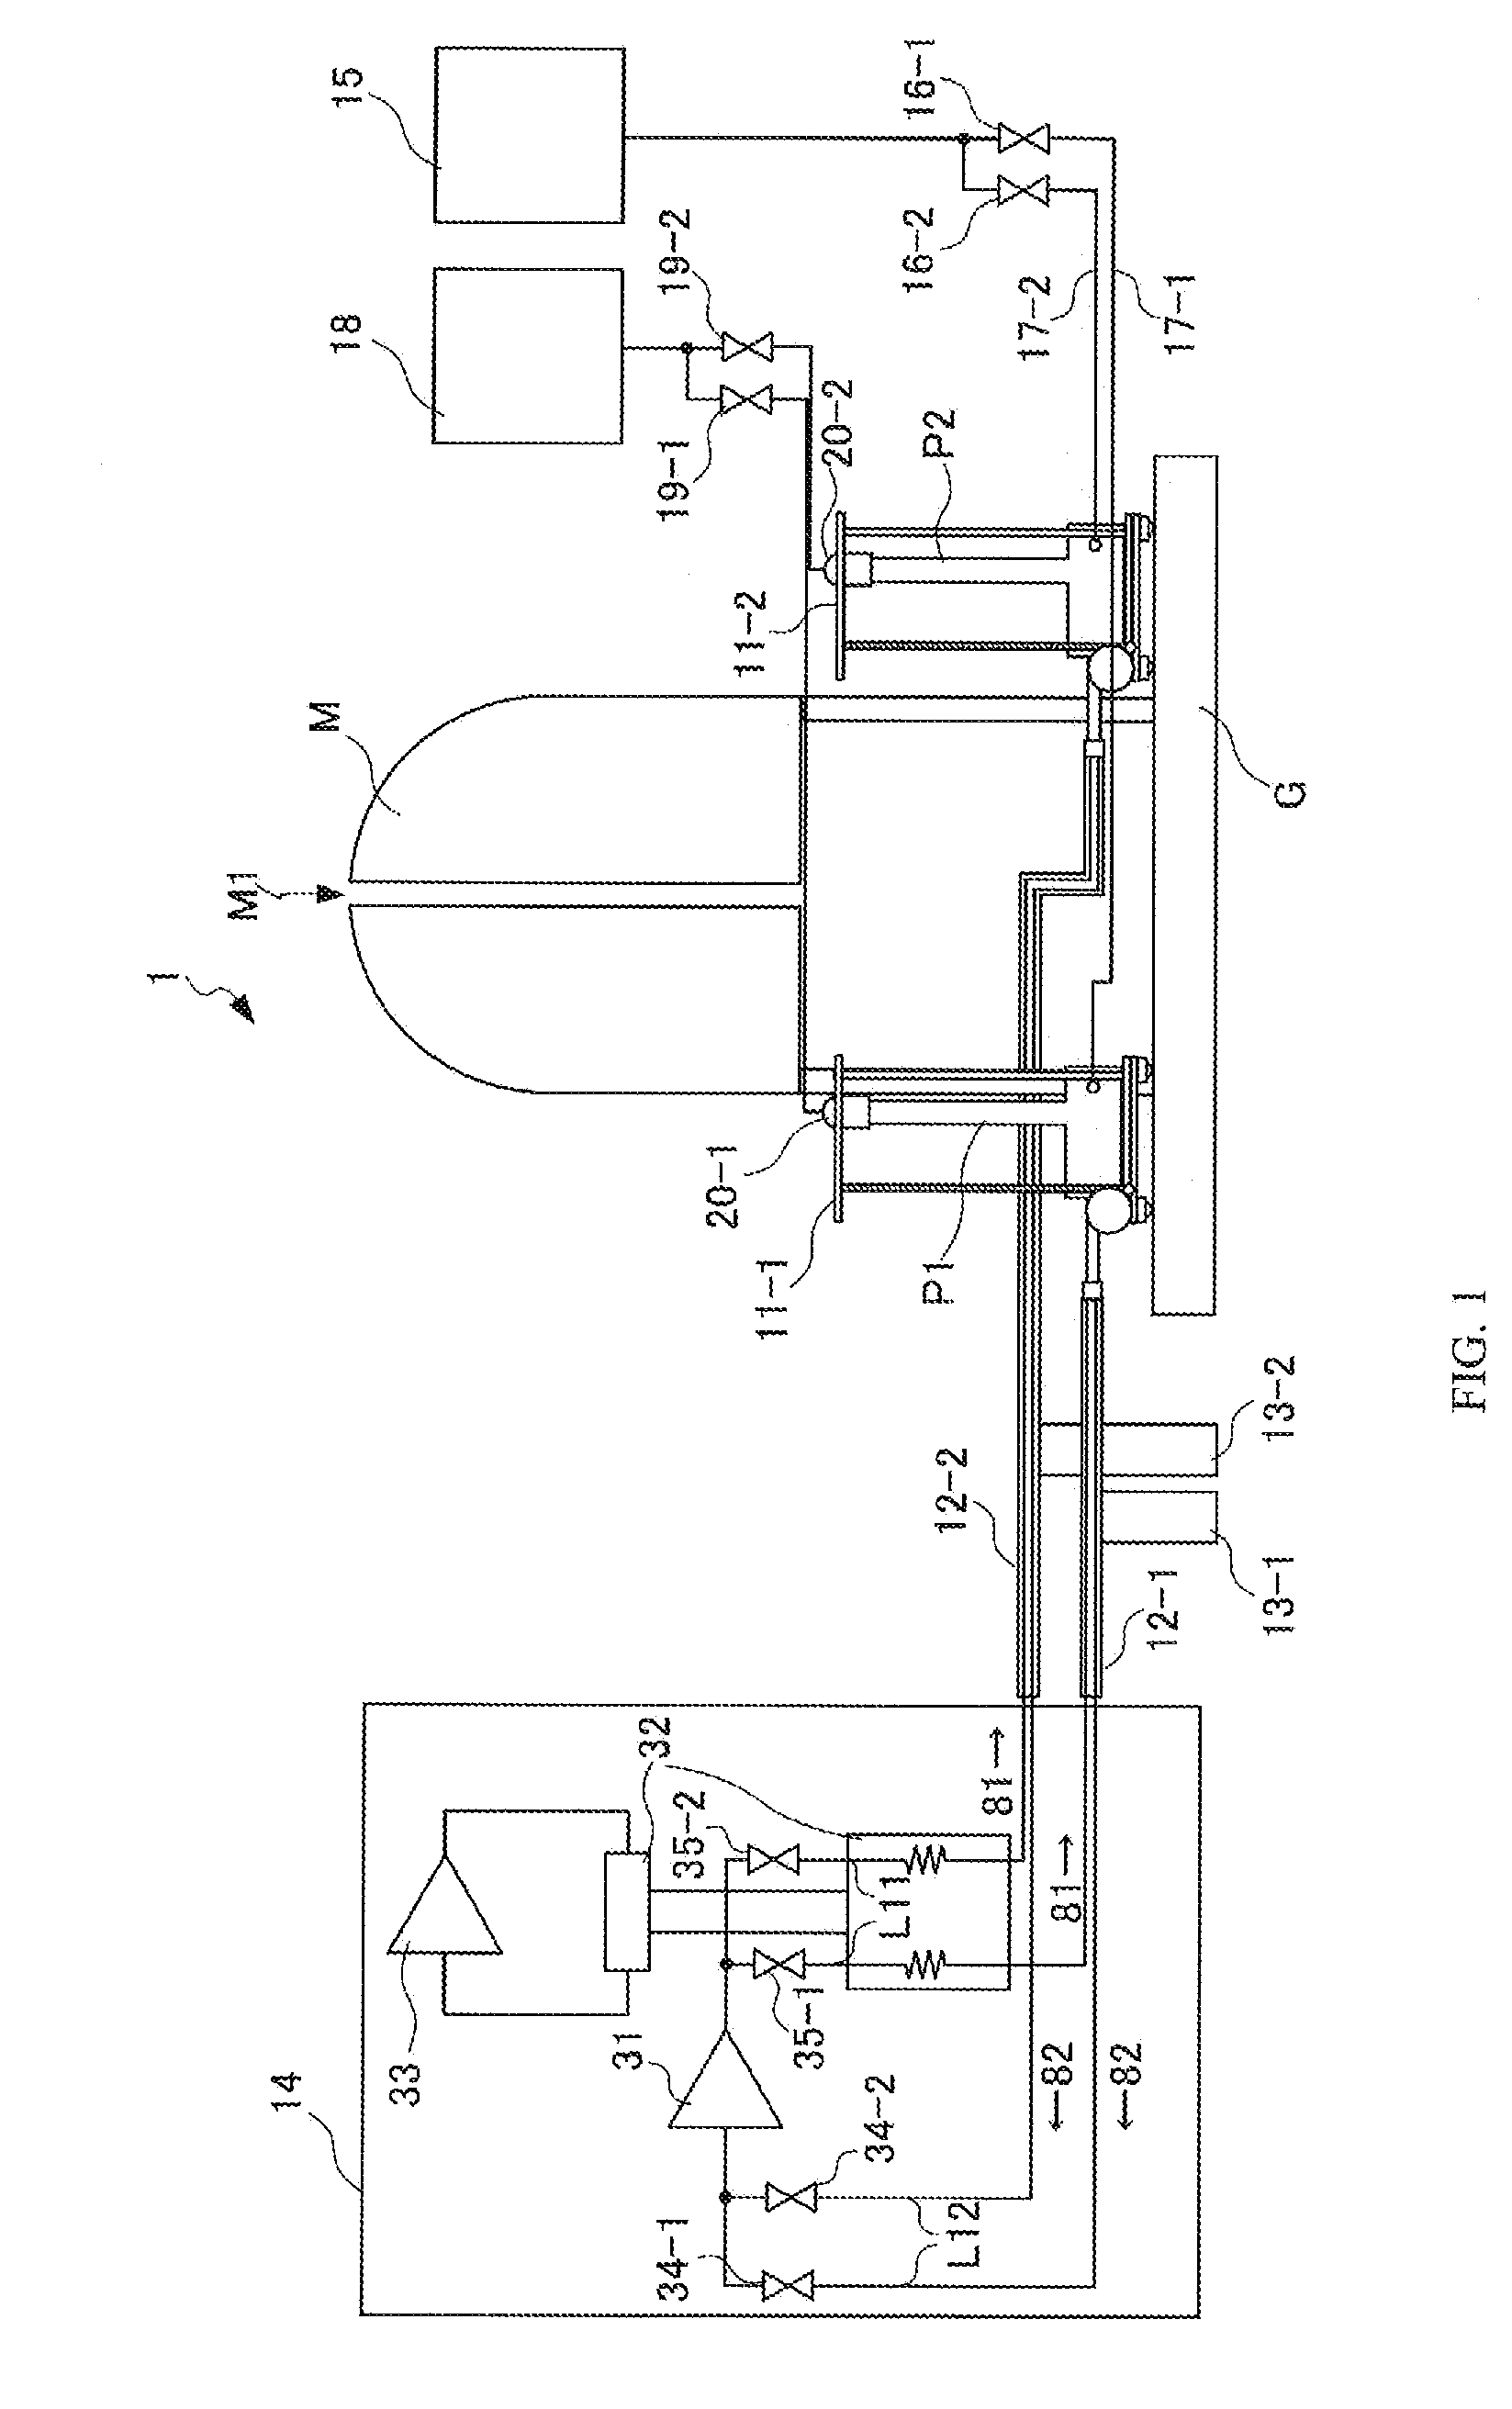 Device for Attaching and Detaching NMR Probe